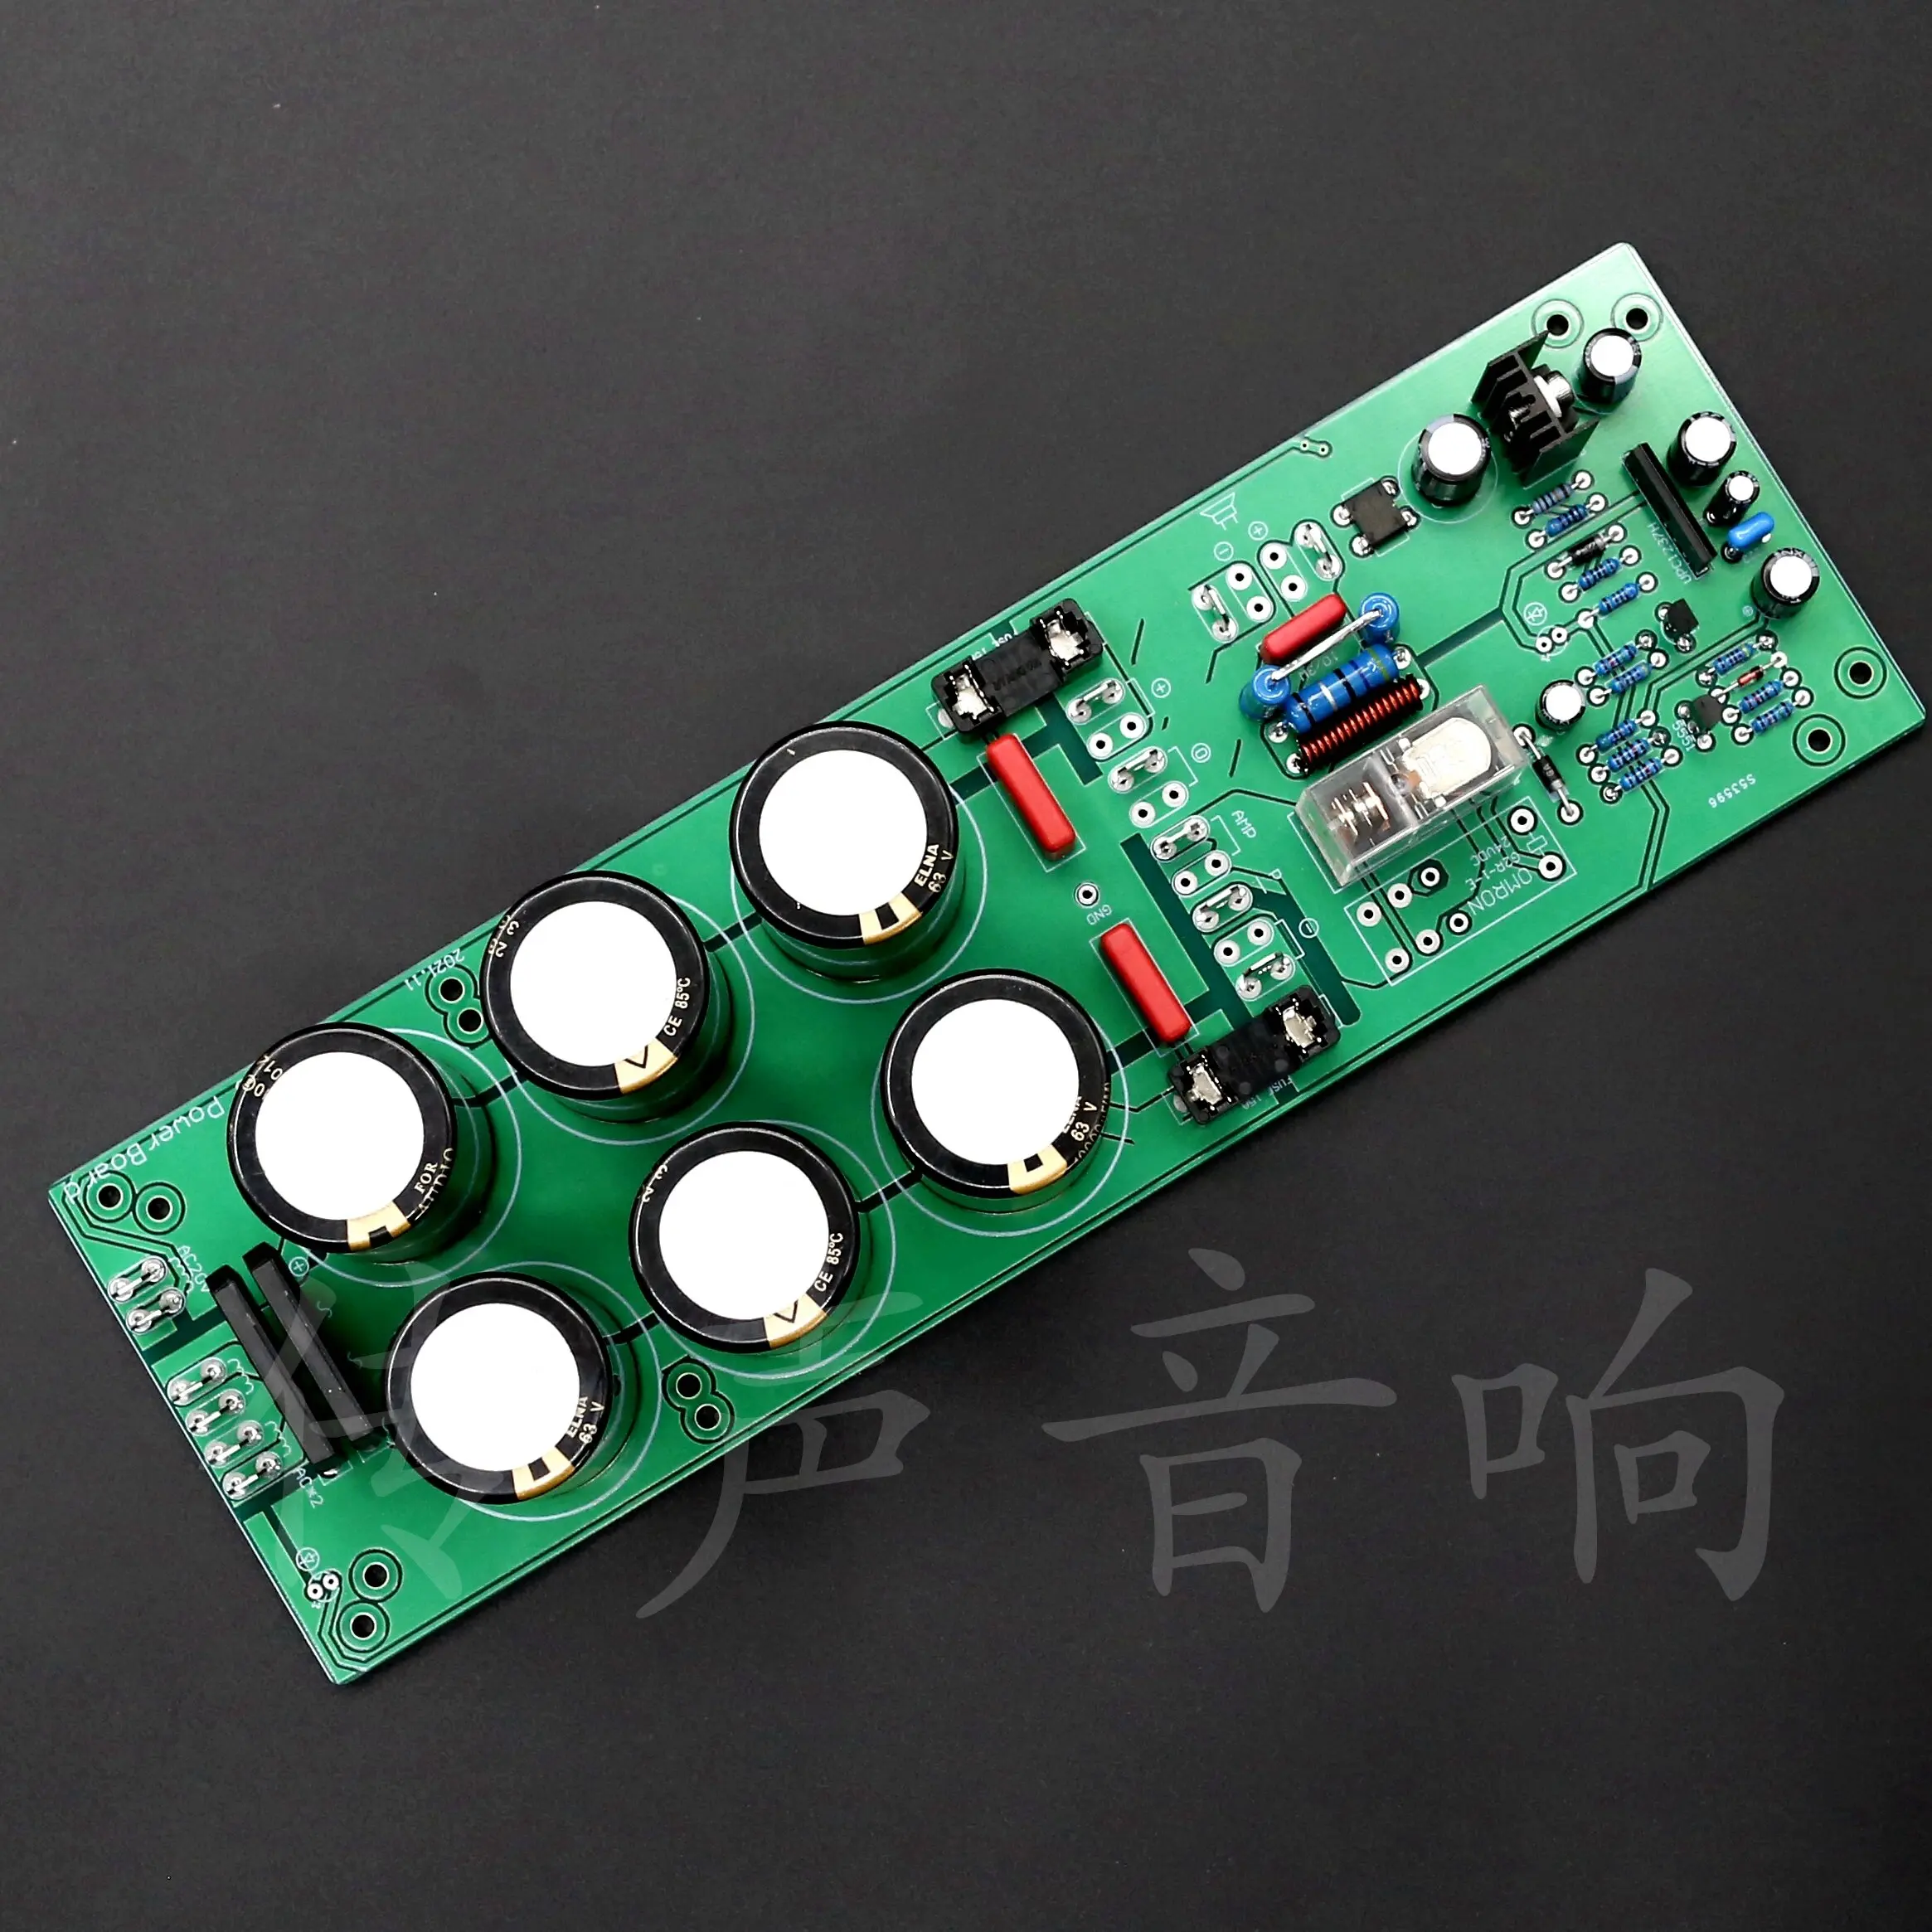 

Enhanced Mono Power Supply Based on the Voice of Berlin - Protection Board